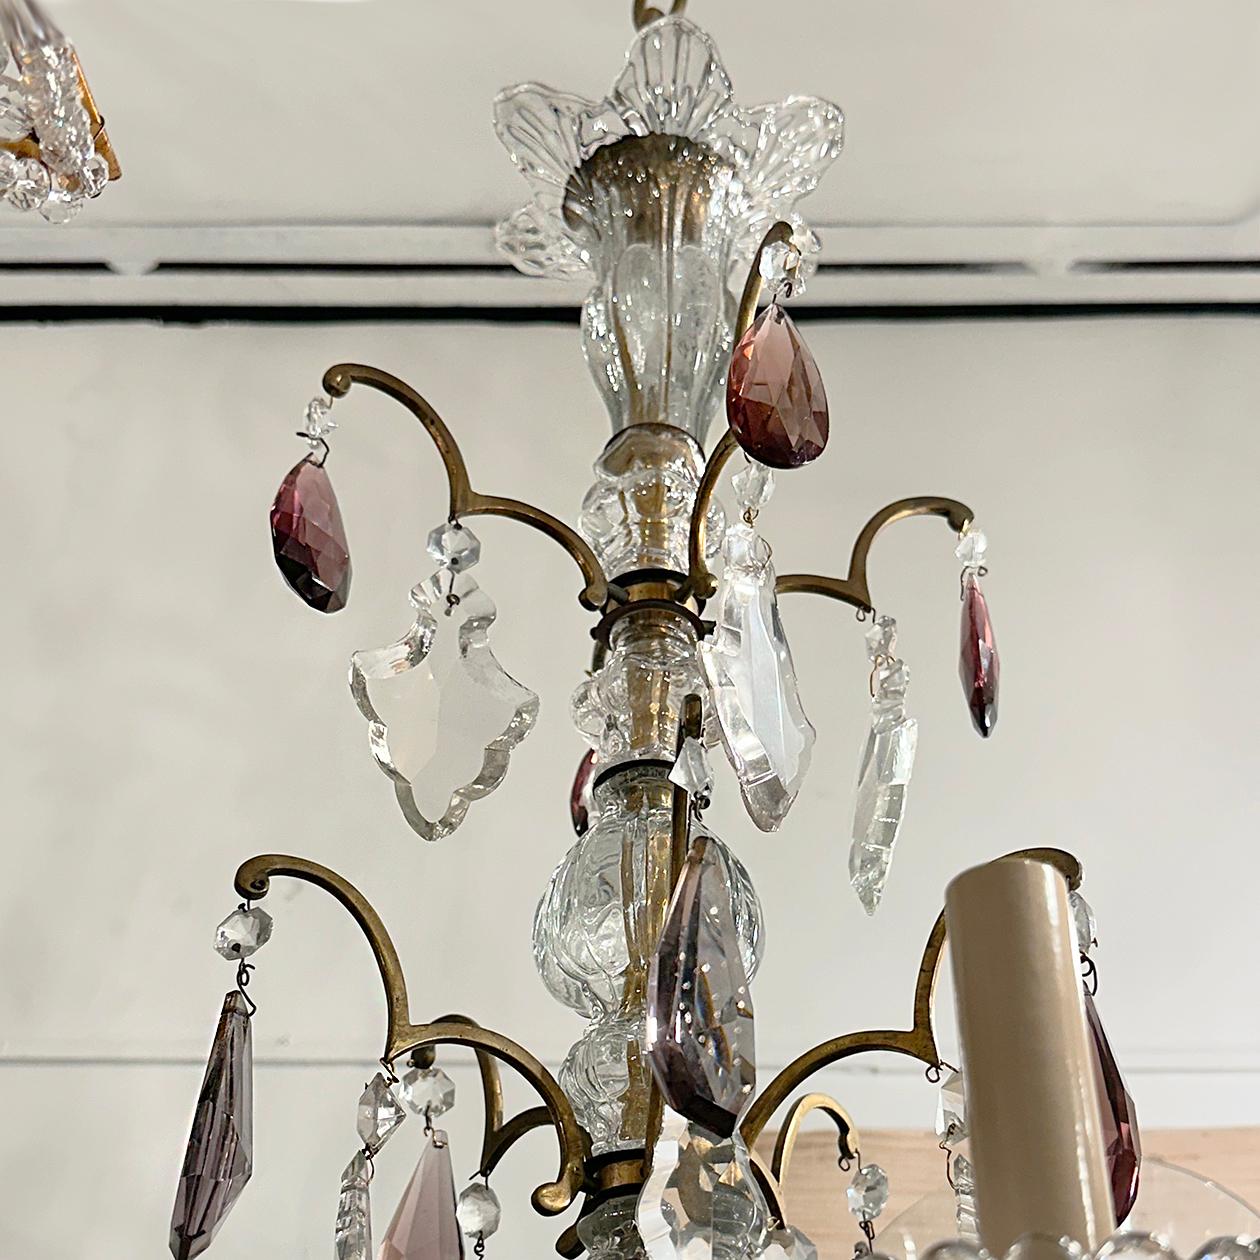 A circa 1900's French bronze and crystal chandelier with 10 lights.

Measurements:
Height: (minimum drop) 42